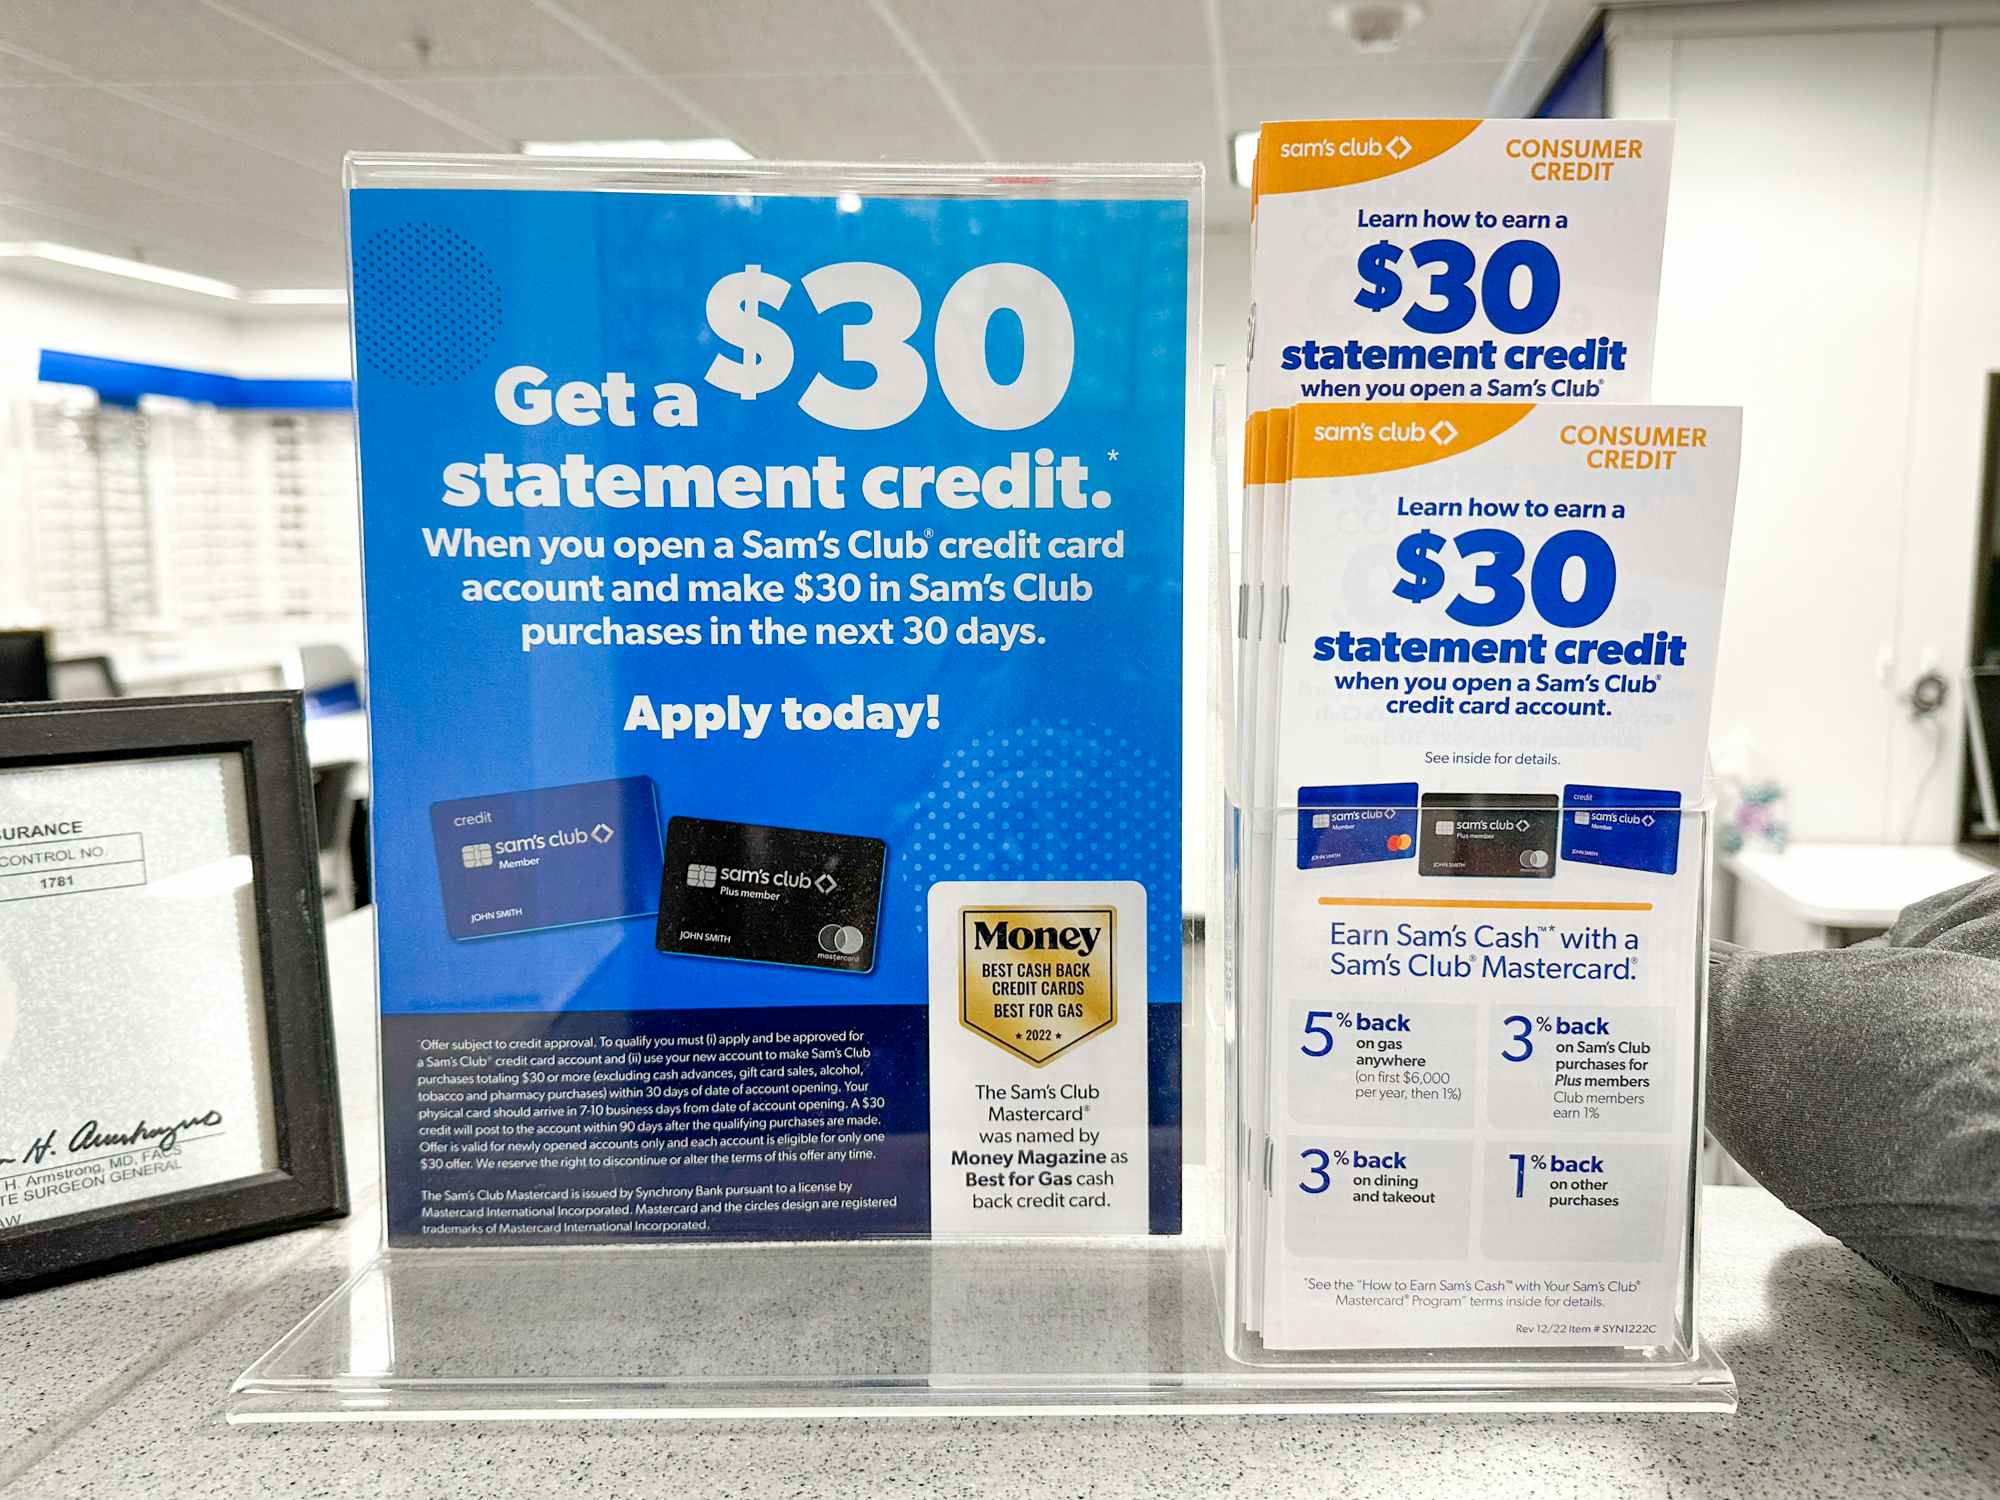 Benefits and Rewards of the Sam's Club Credit Card